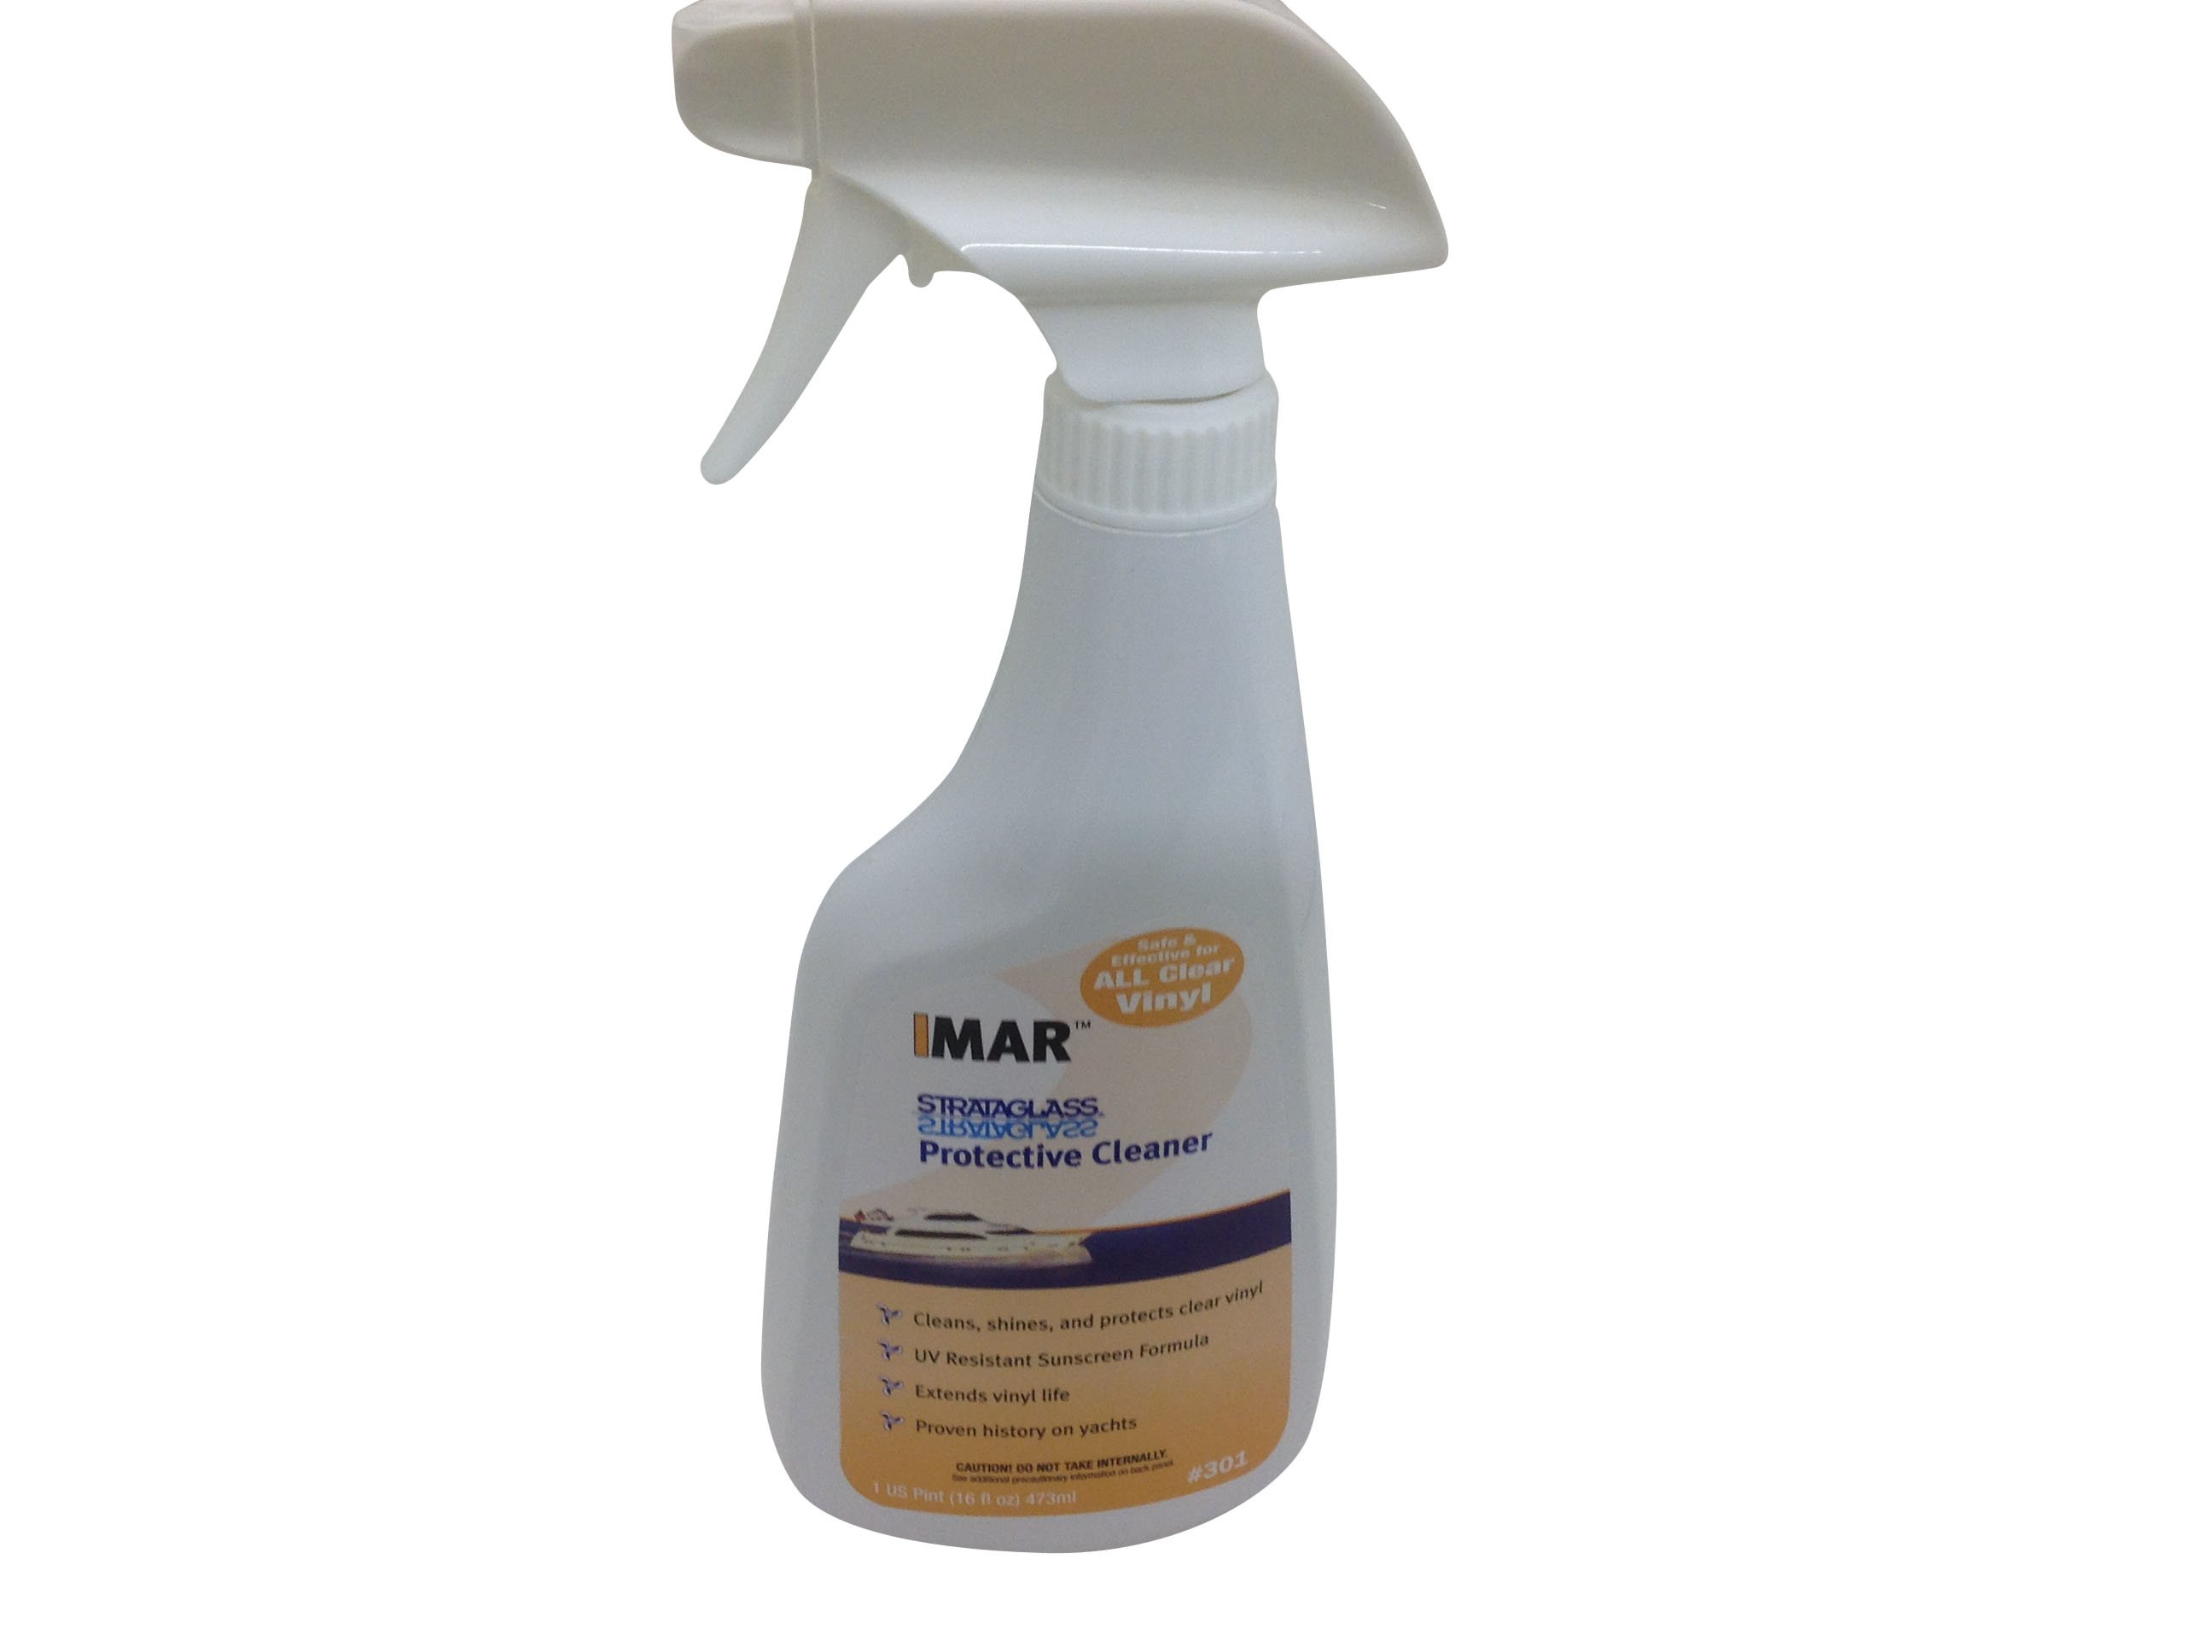 IMAR Protective Cleaner